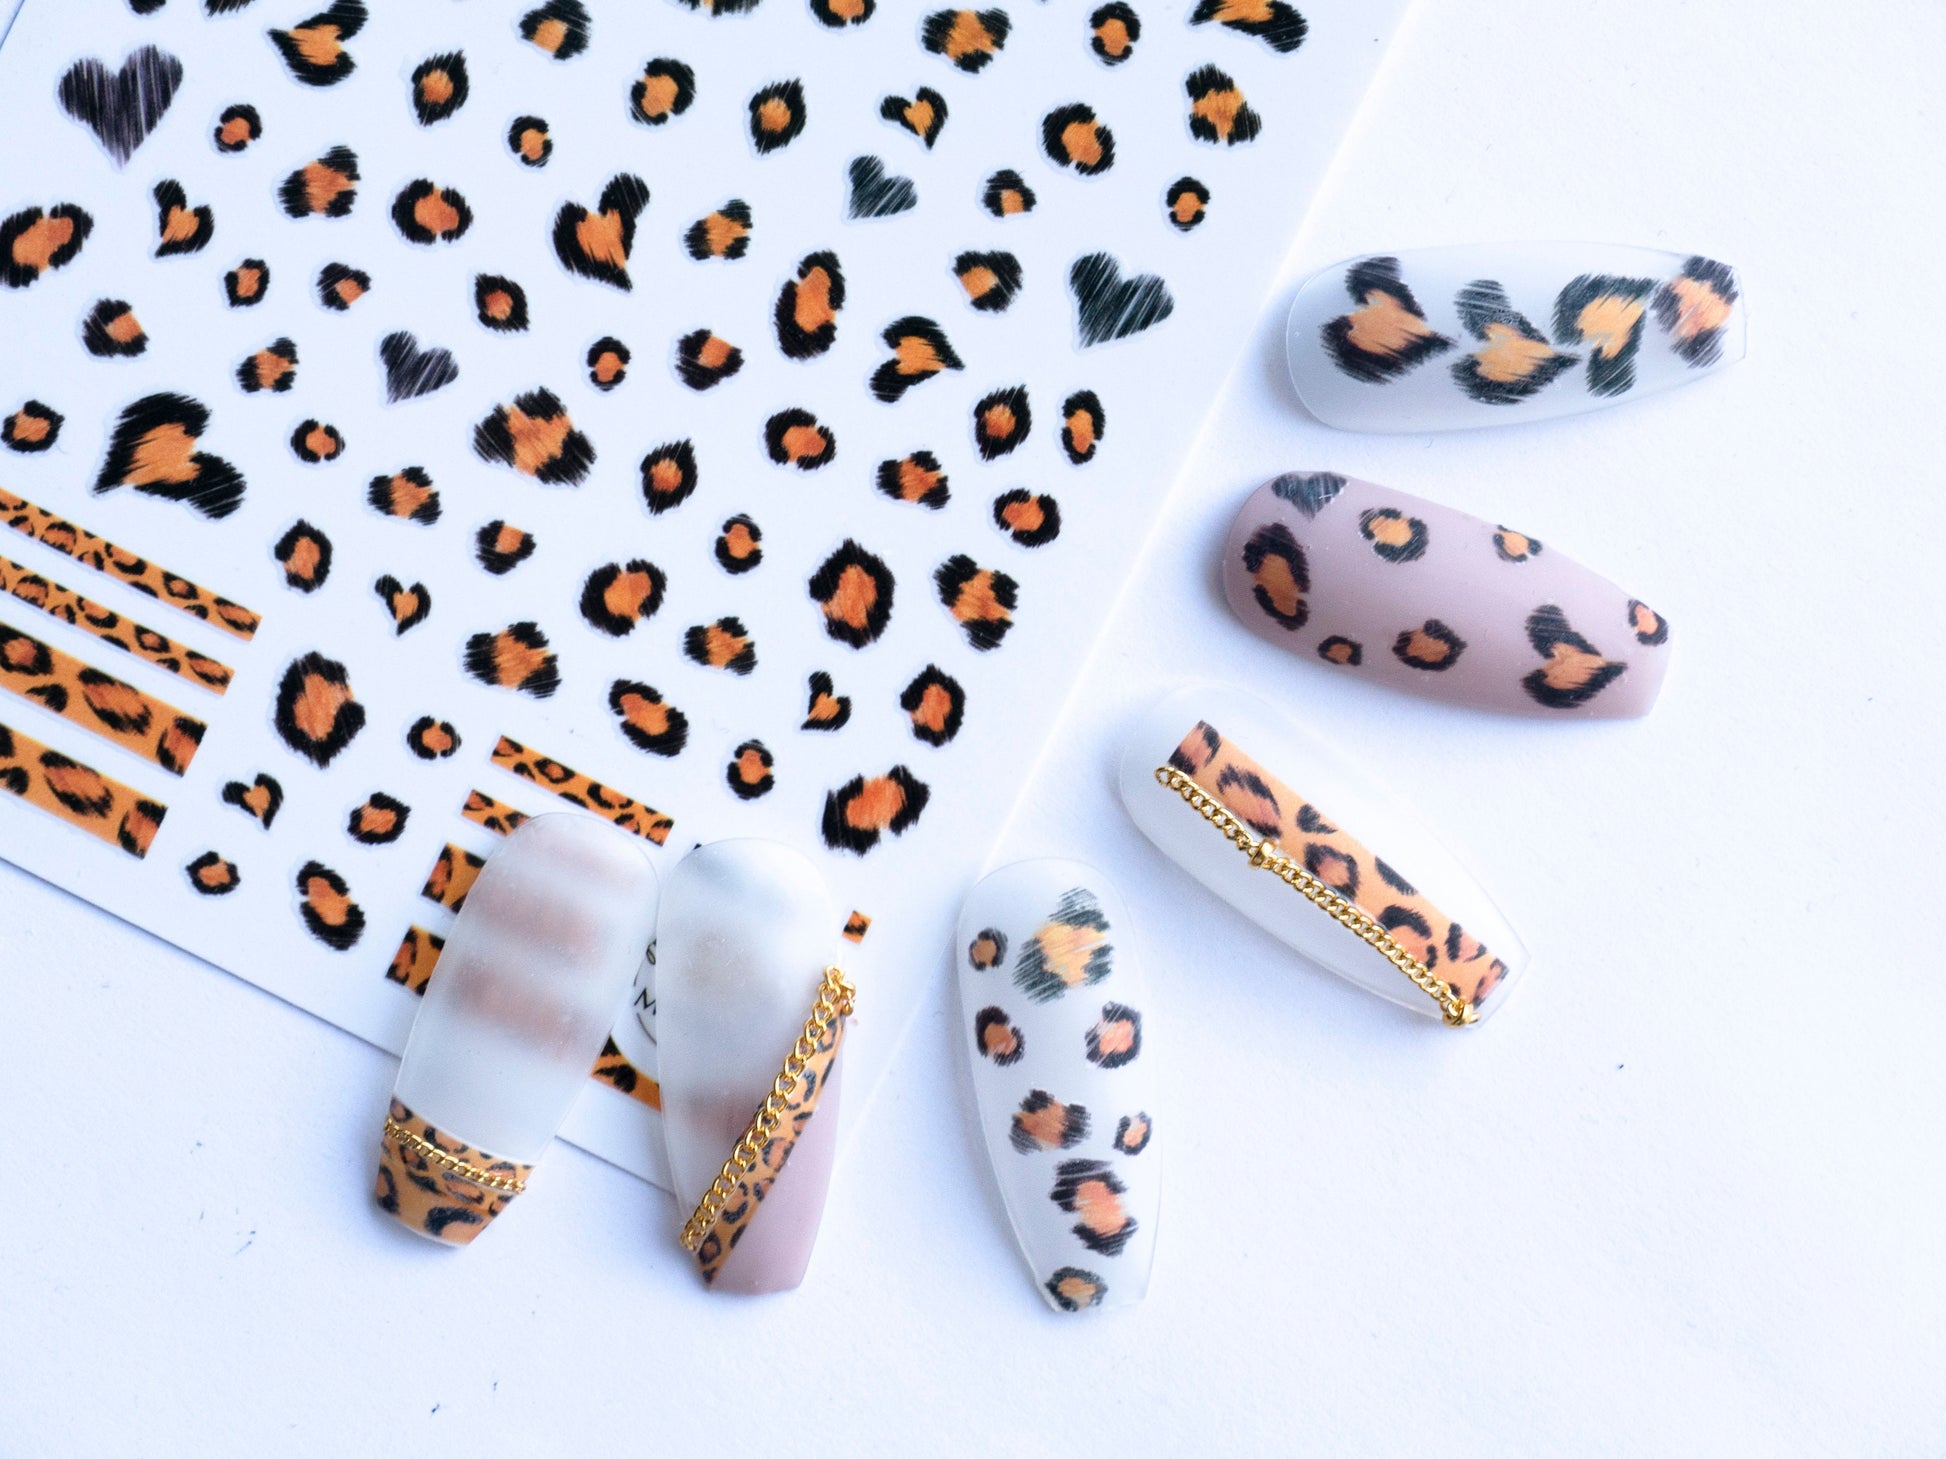 Leopard Print Nail Sticker/ Animal Pattern Self Adhesive Decals/ Brown Heart Cute Peel Off Nail Deco